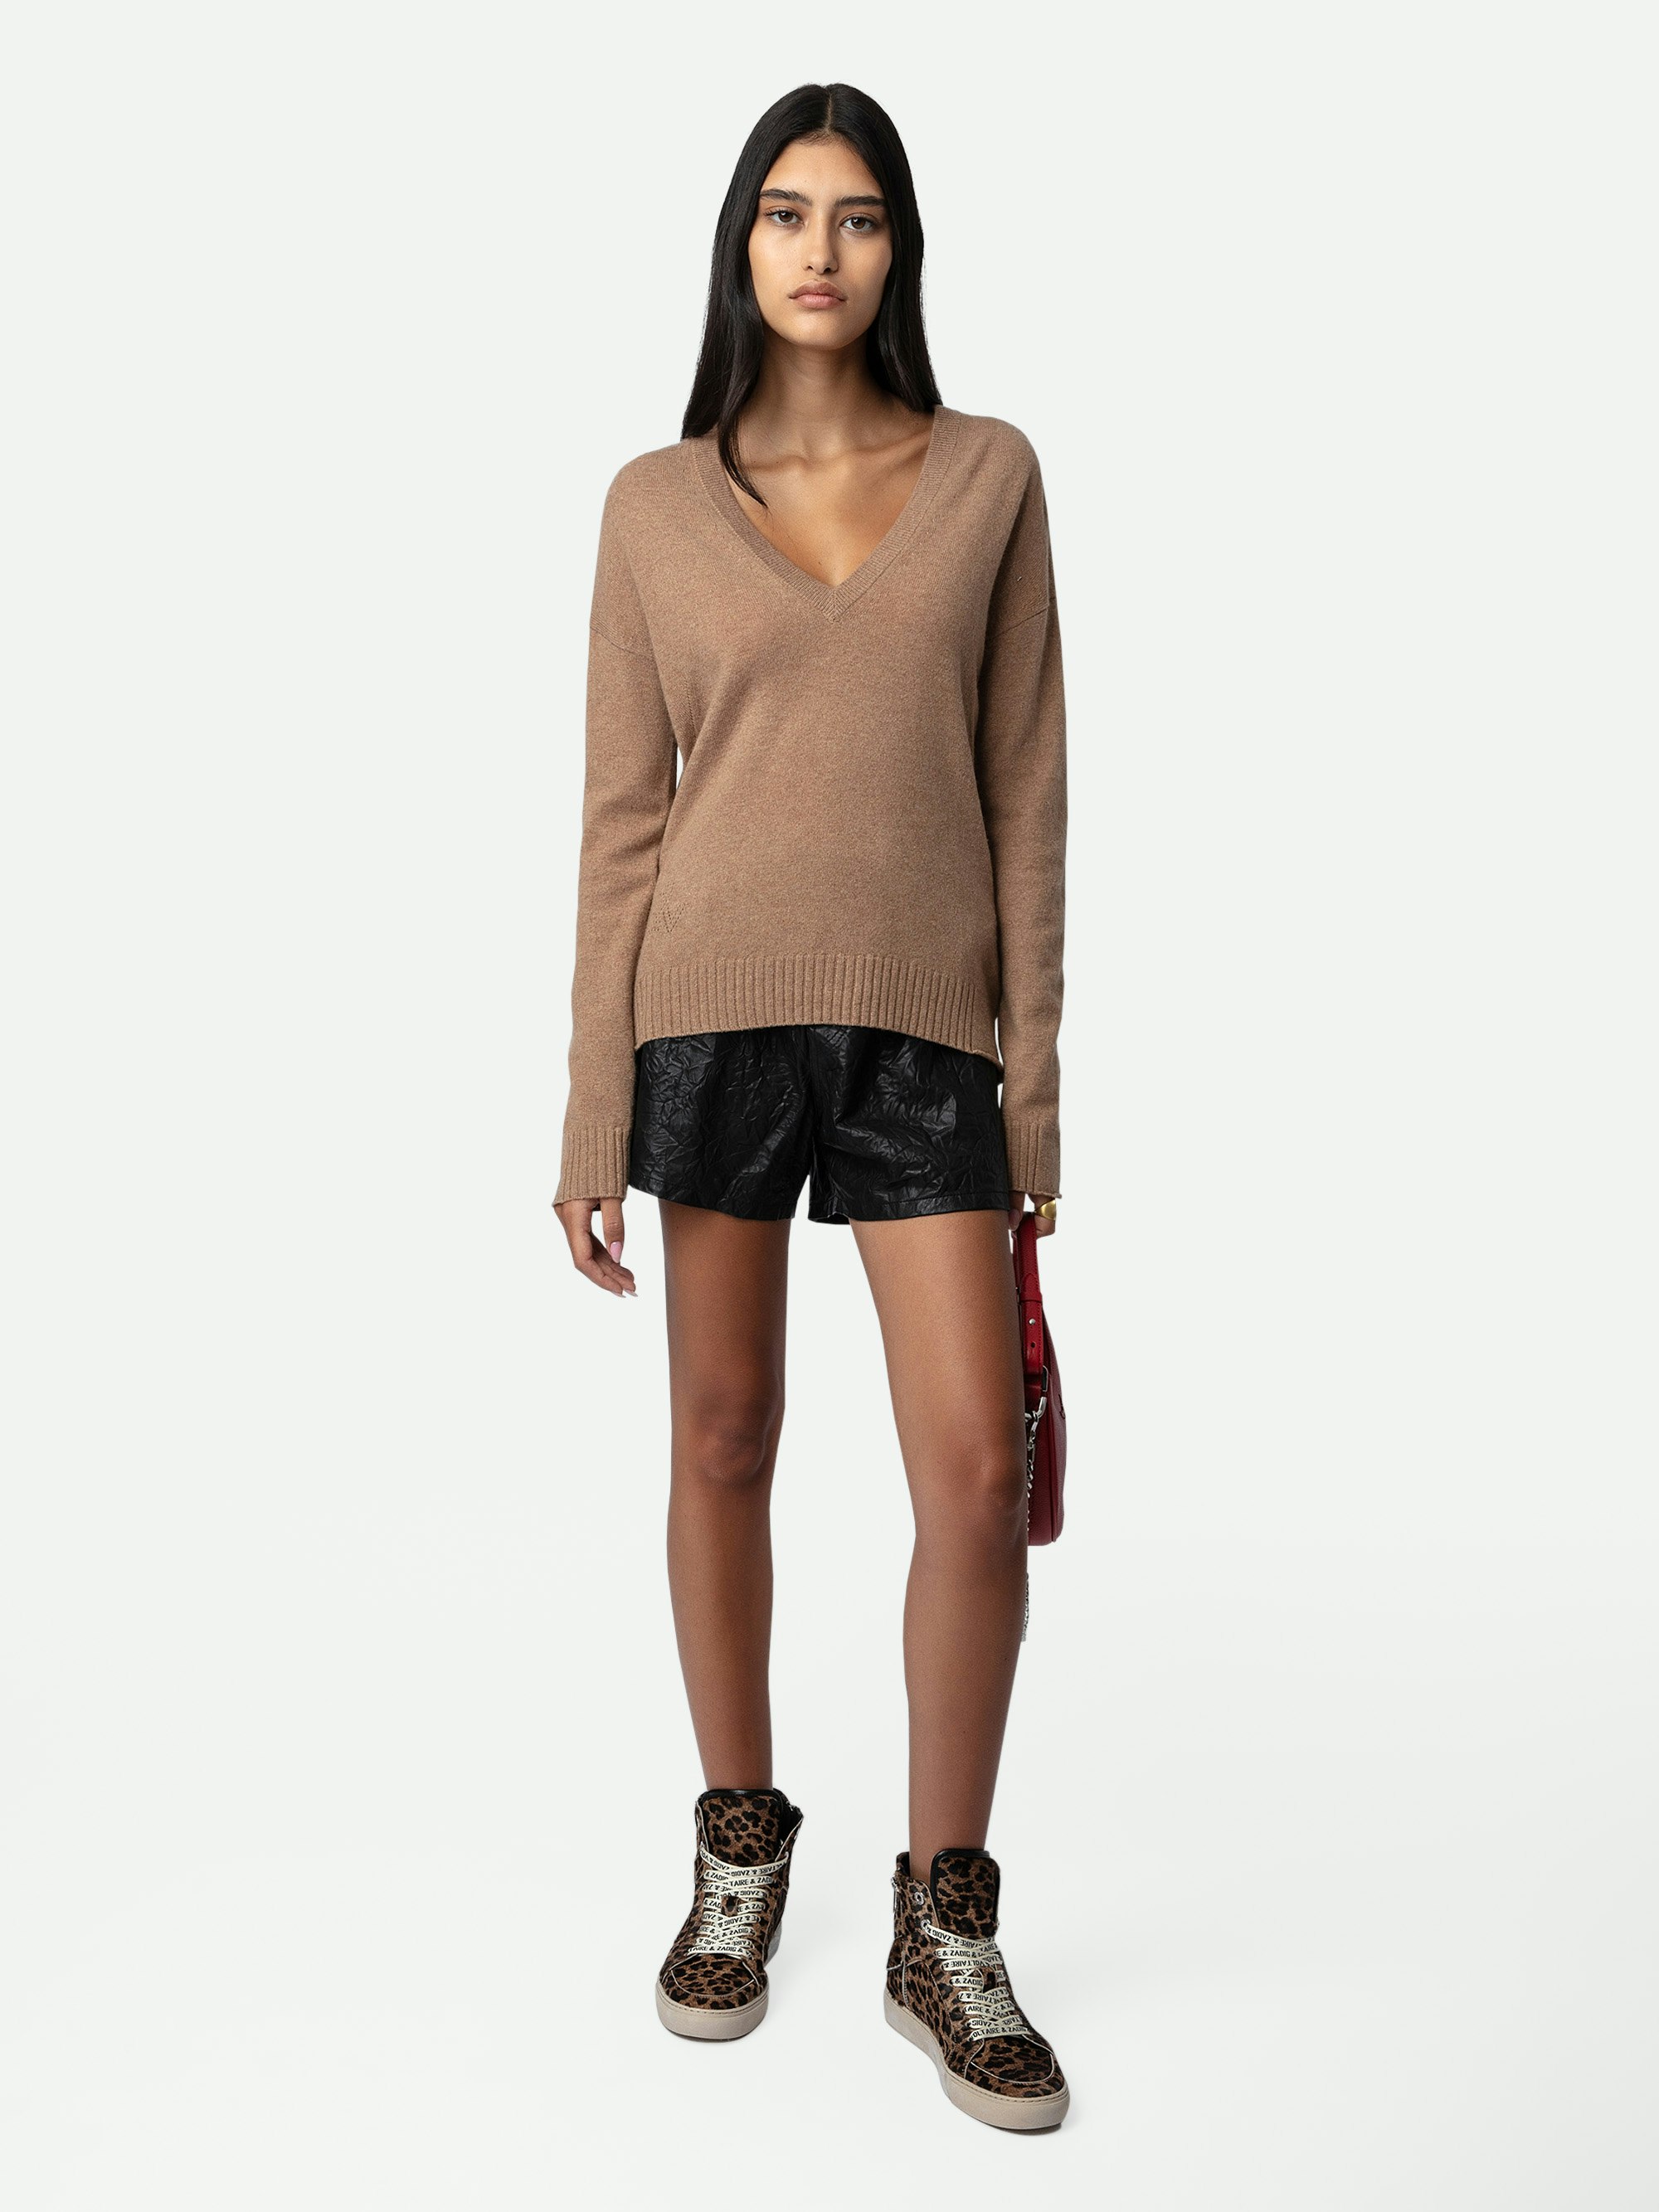 Vivi Patch Jumper 100% Cashmere - Women’s camel 100% cashmere jumper with star patches on the elbows.